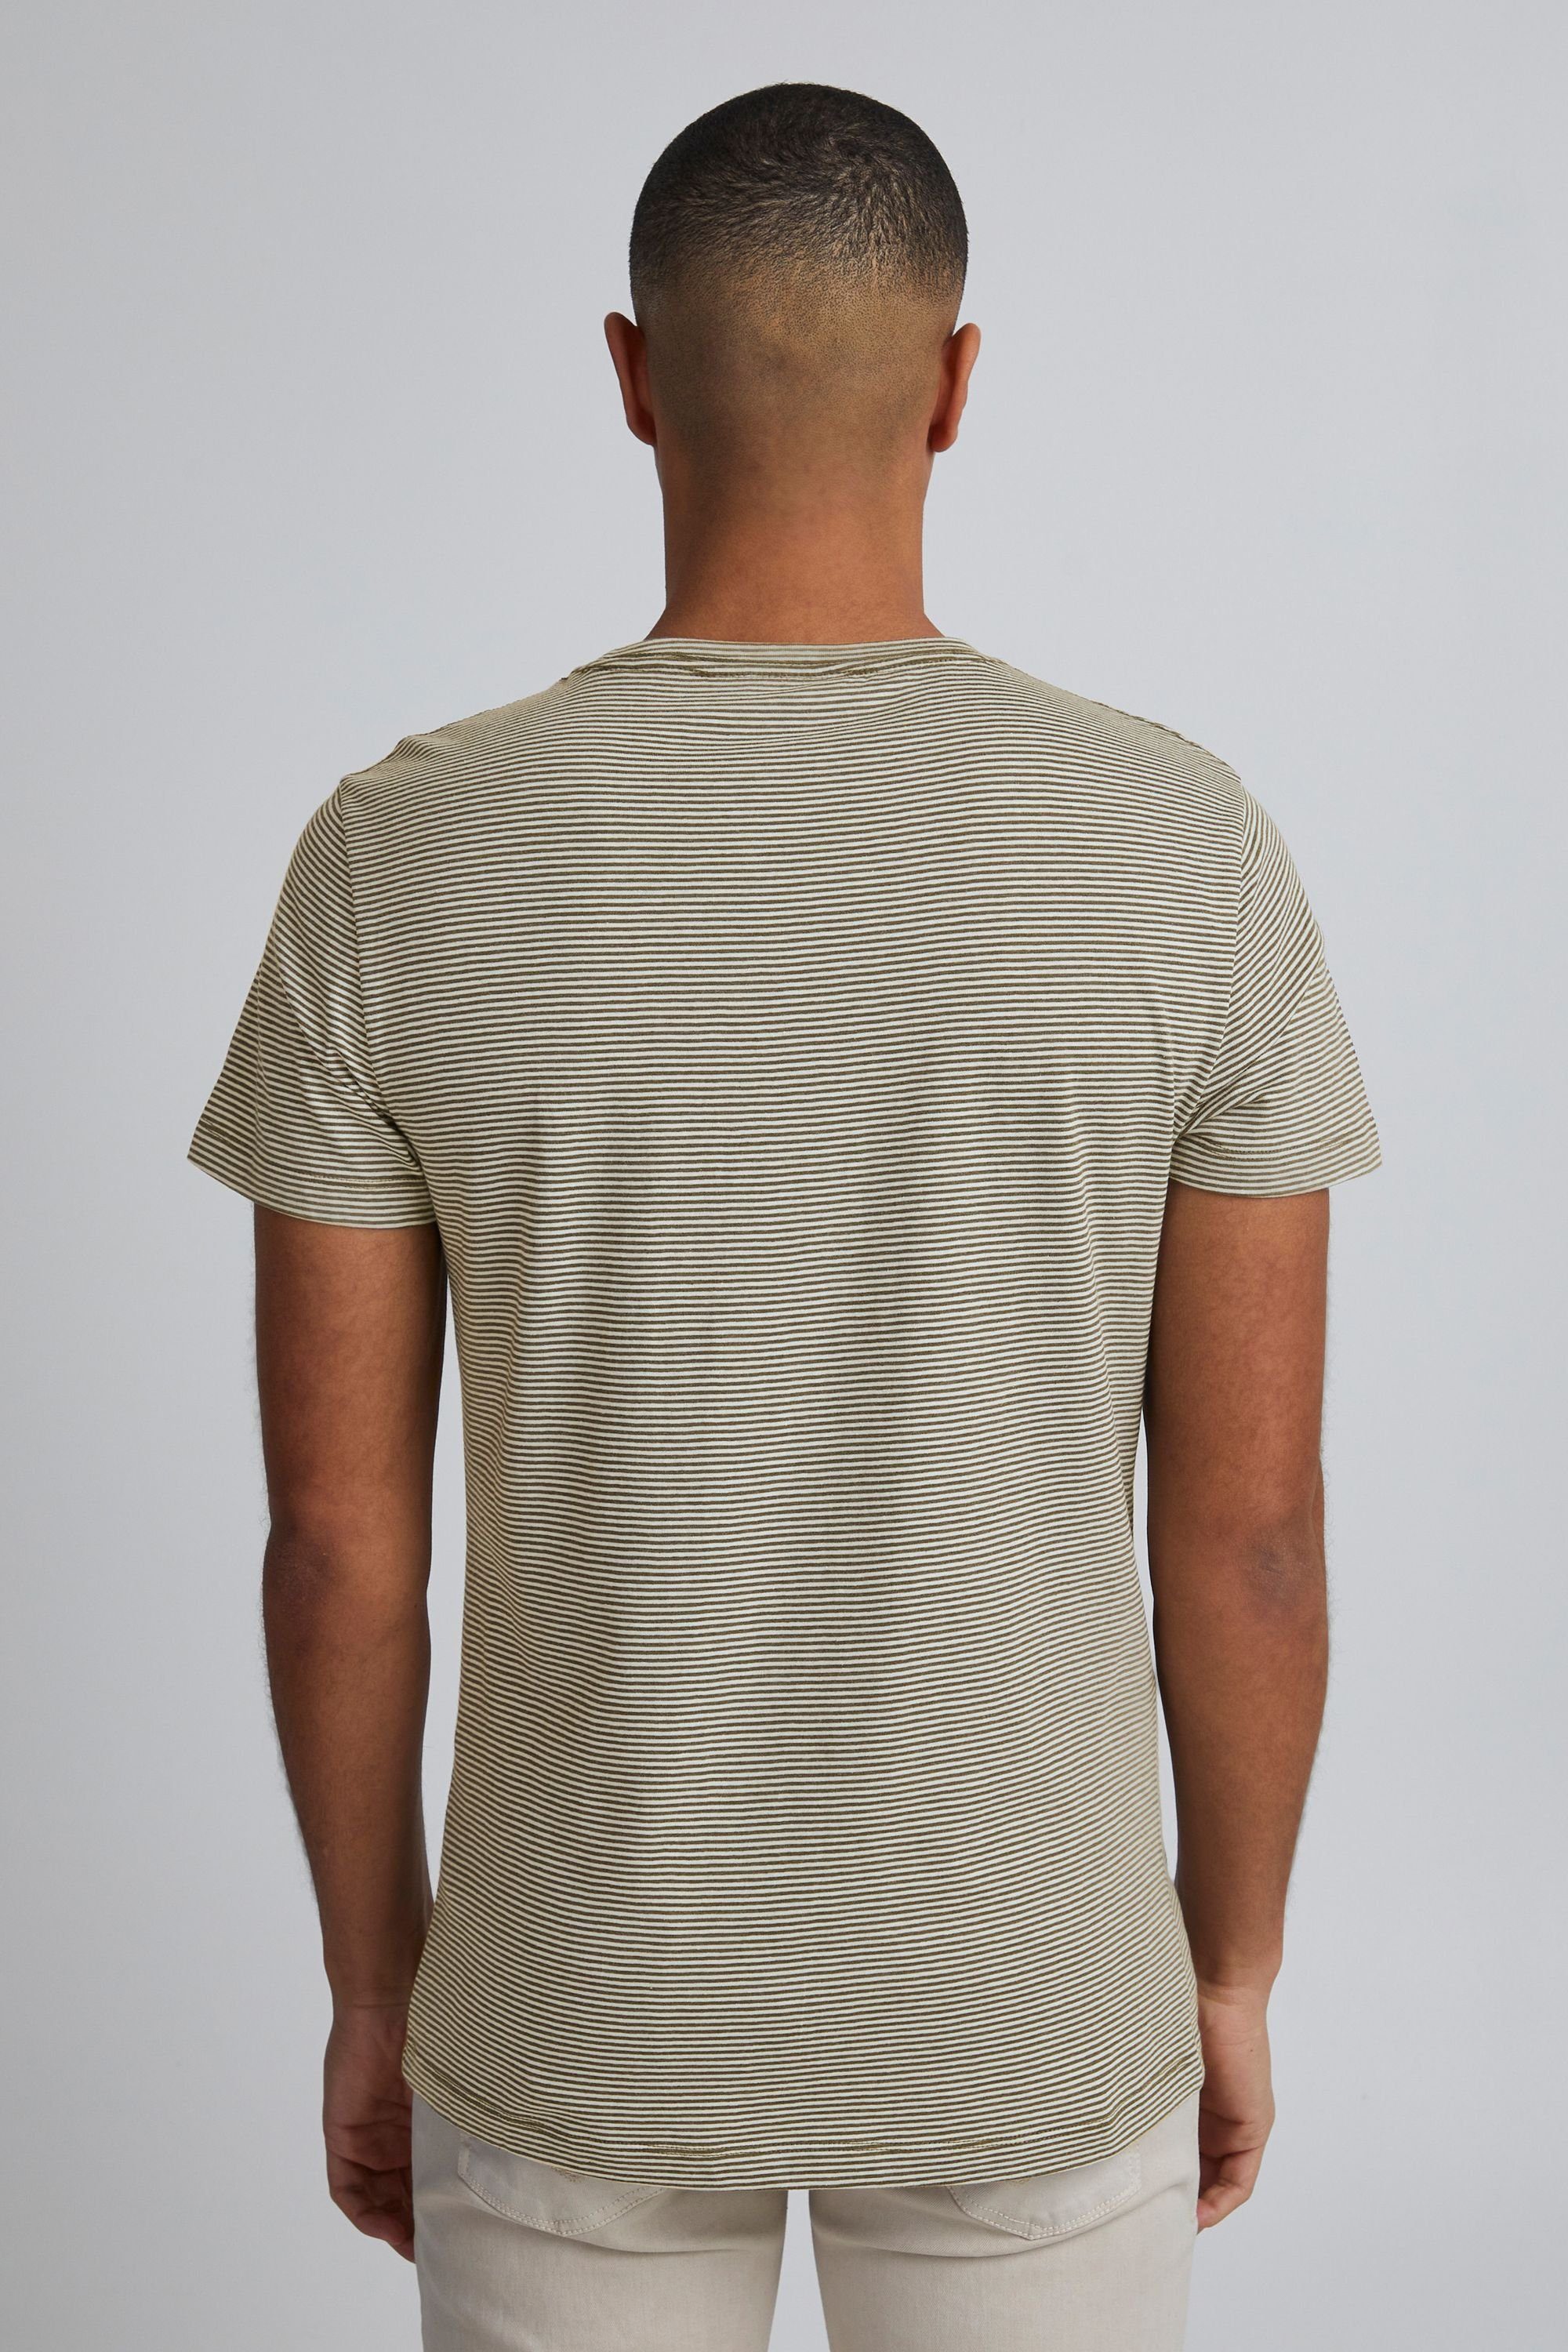 PRFiete Night 11 Project Project 11 T-Shirt Olive